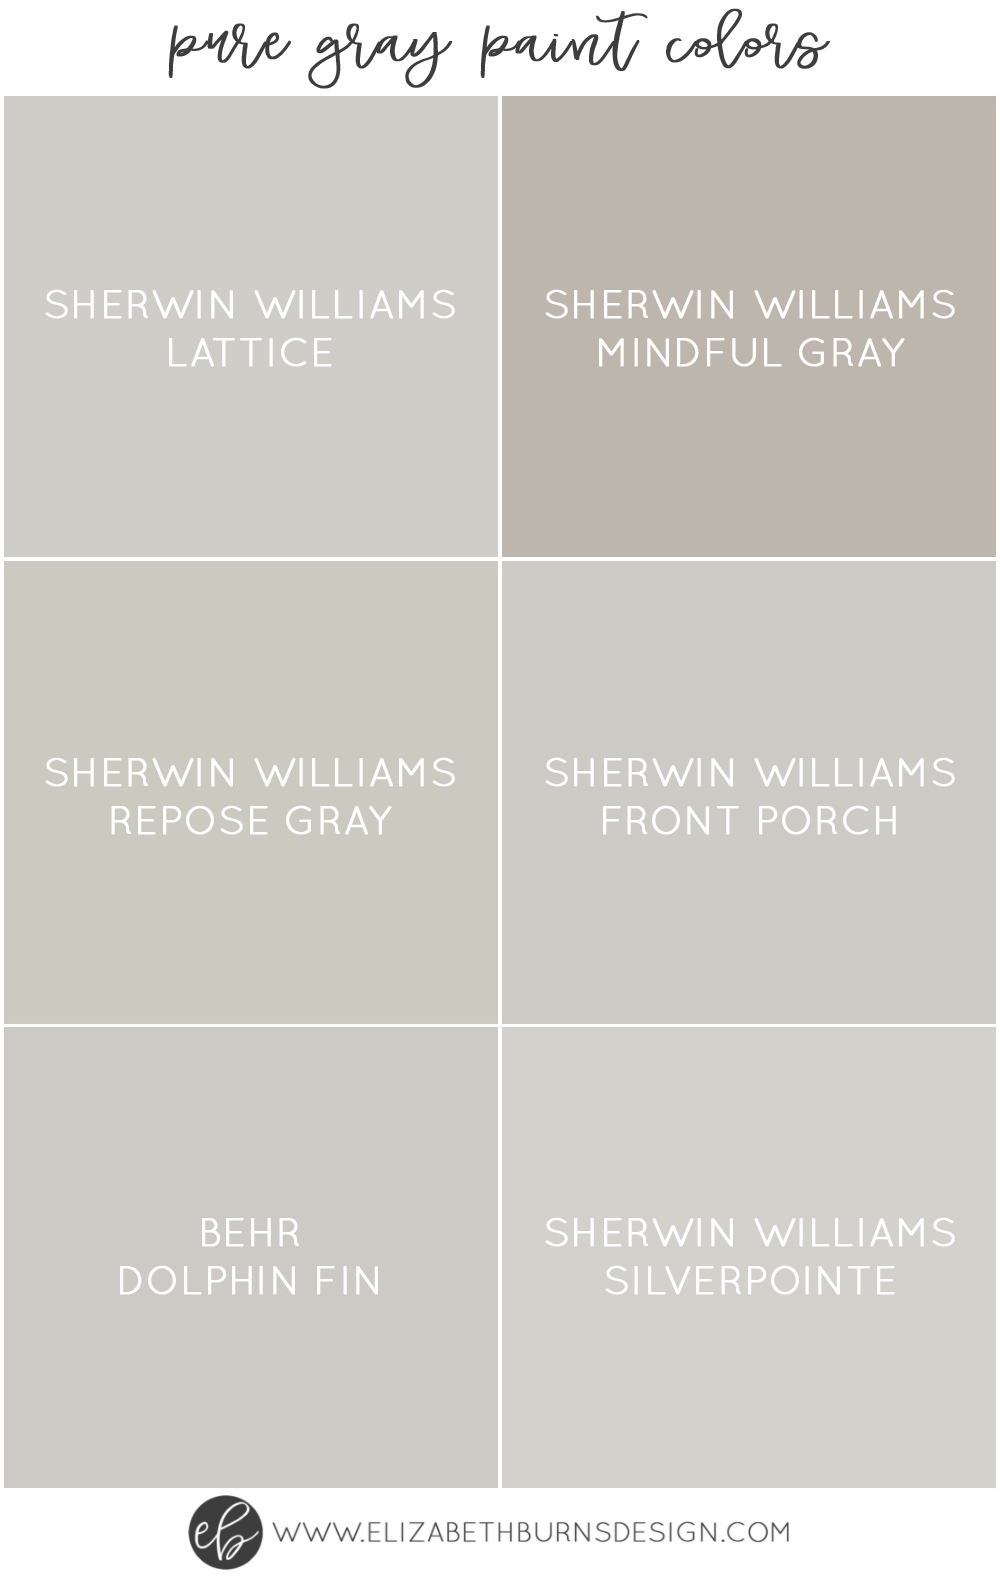 The Best Pure Grey Paint Colors Paint Guide Elizabeth Burns Design Raleigh Nc Interior Designer,How To Decorate Your Room Diy Easy